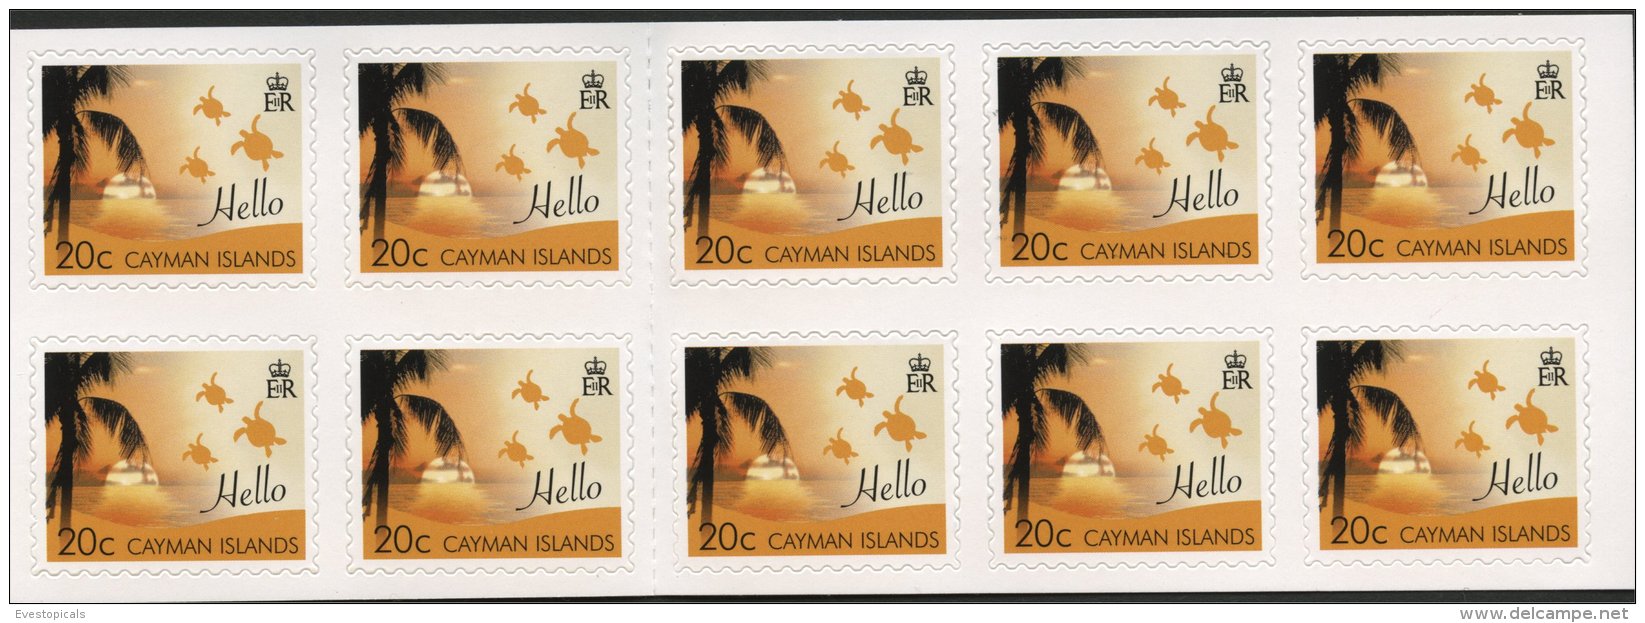 CAYMAN ISLANDS GREETING STAMPS FULL SET BOOKLETS 2008 - Cayman Islands